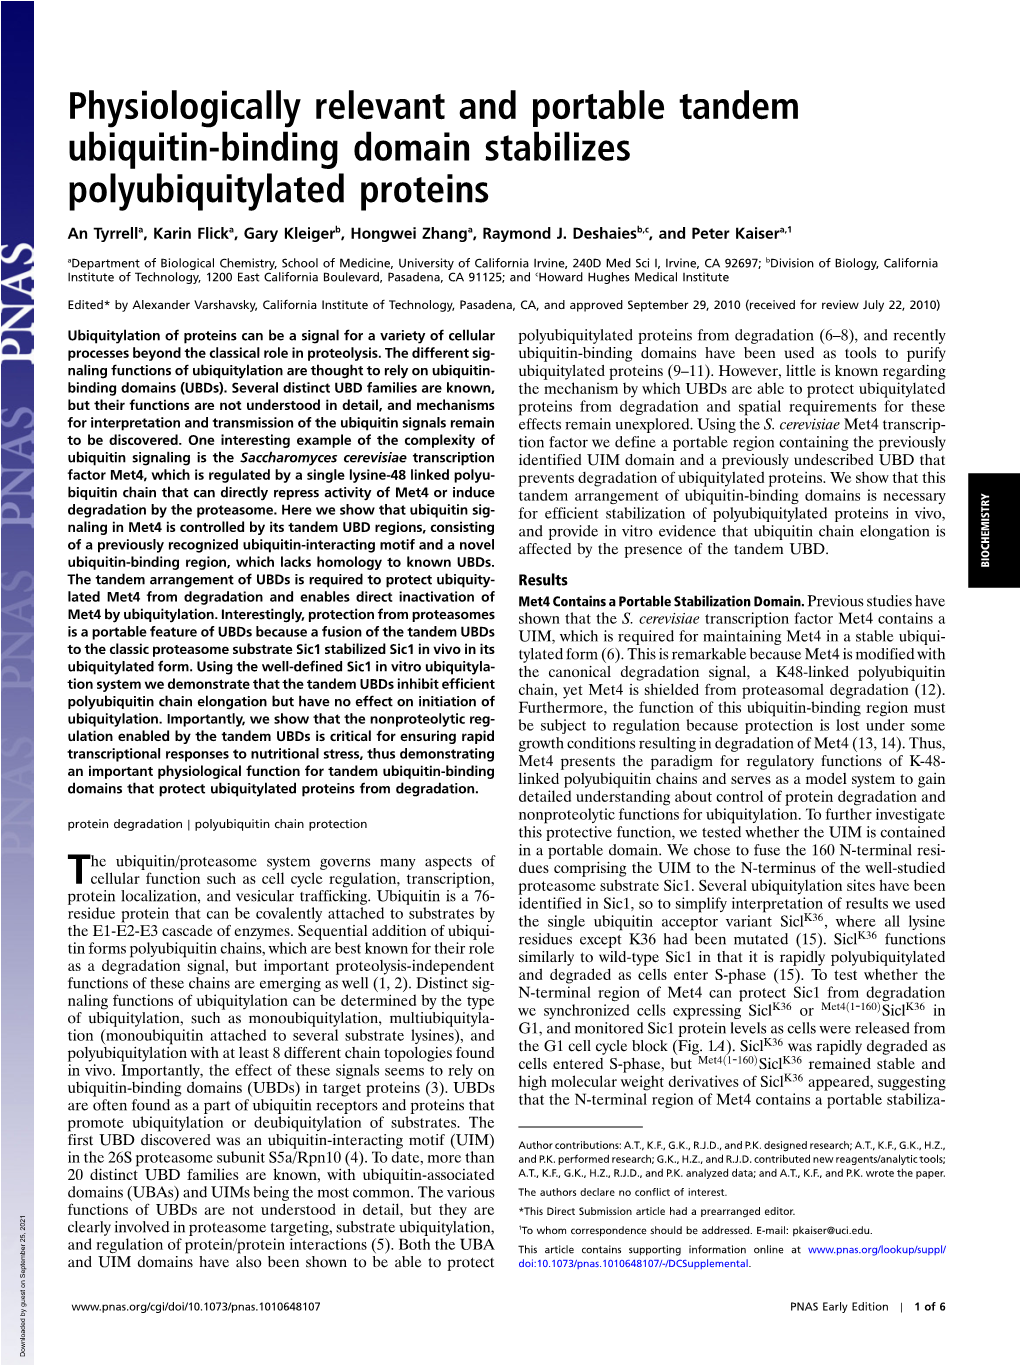 Physiologically Relevant and Portable Tandem Ubiquitin-Binding Domain Stabilizes Polyubiquitylated Proteins